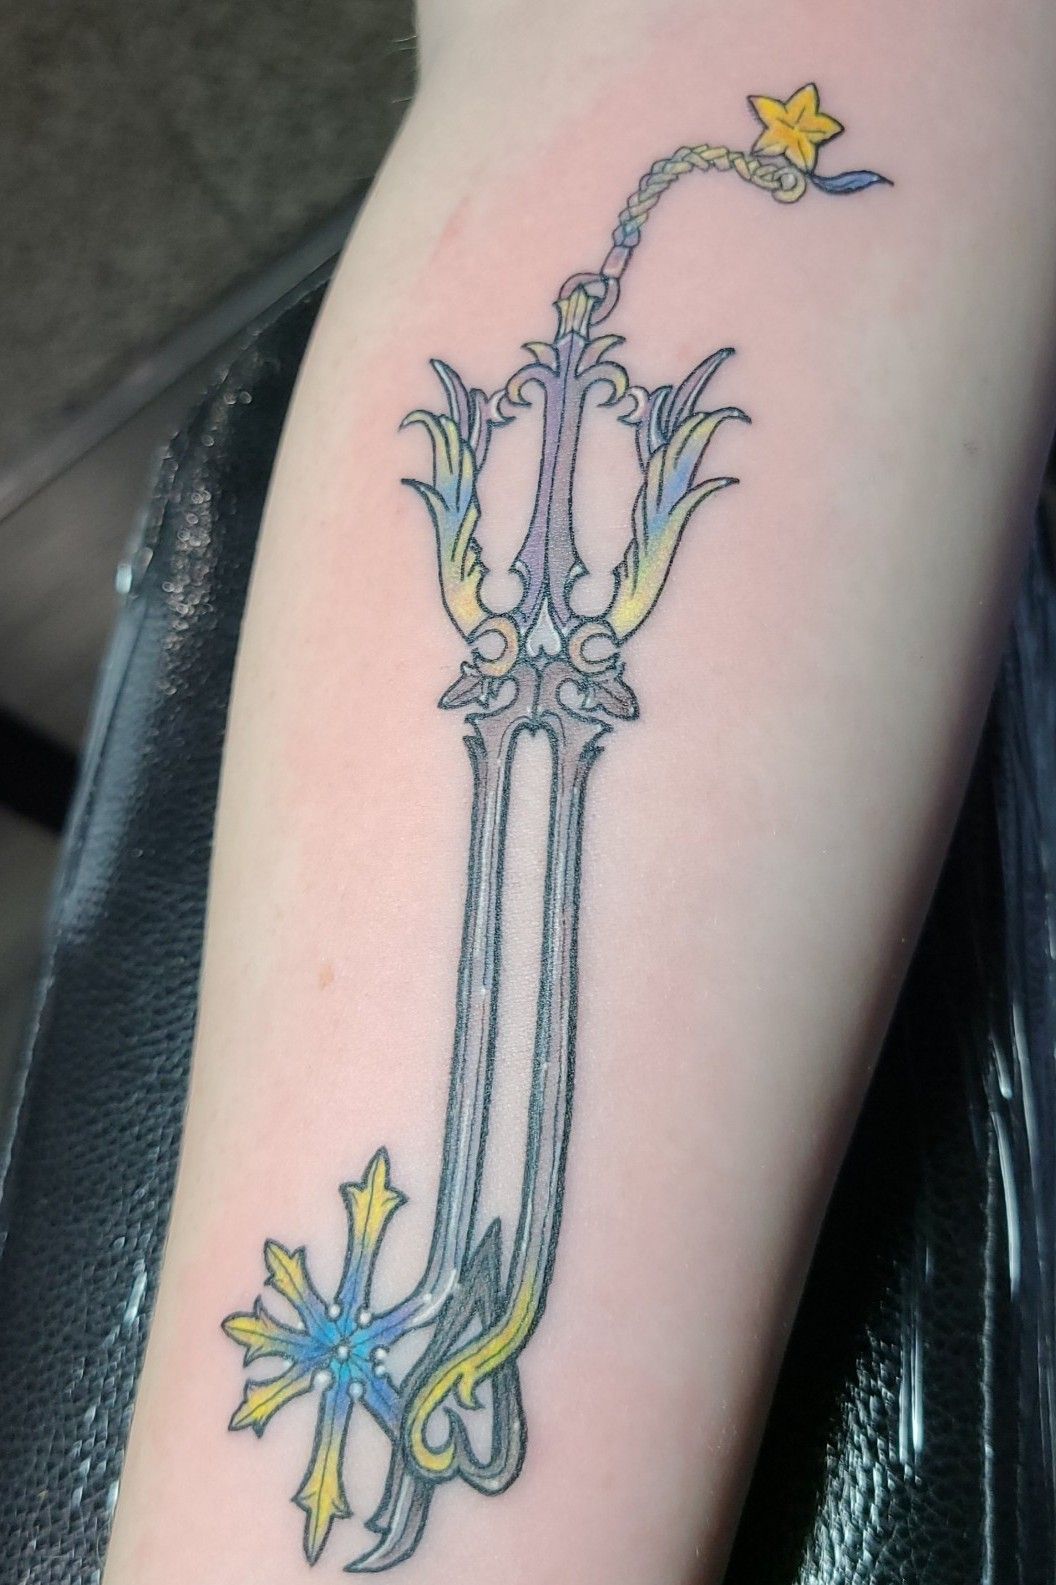 Recently got an Oblivion and Oathkeeper Tattoo on my forearms Thought they  might be enjoyed on here  rKingdomHearts